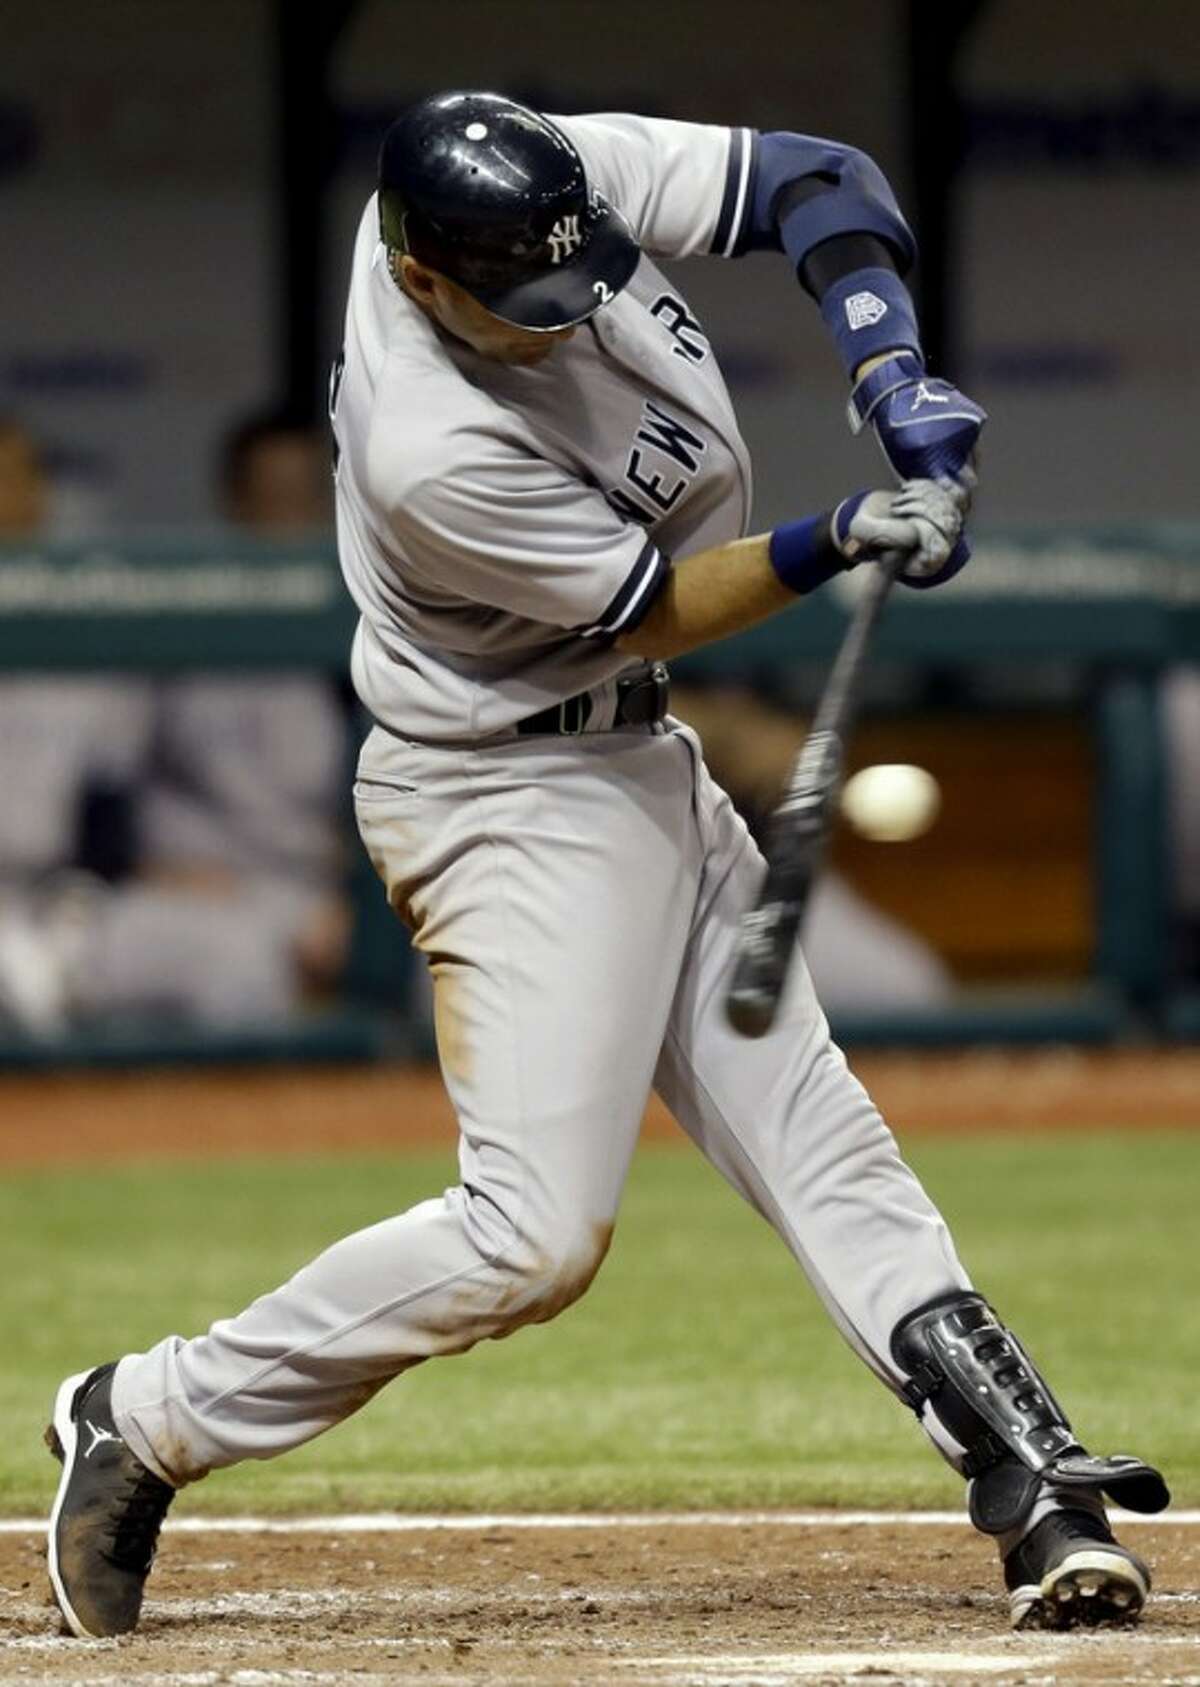 New York Yankees' Derek Jeter hits a seventh-inning fielder's choice off Tampa Bay Rays relief pitcher Kyle Farnsworth during a baseball game, Wednesday, Sept. 5, 2012, in St. Petersburg, Fla. Two runs scored on a throwing error by Rays' Elliot Johnson. (AP Photo/Chris O'Meara)